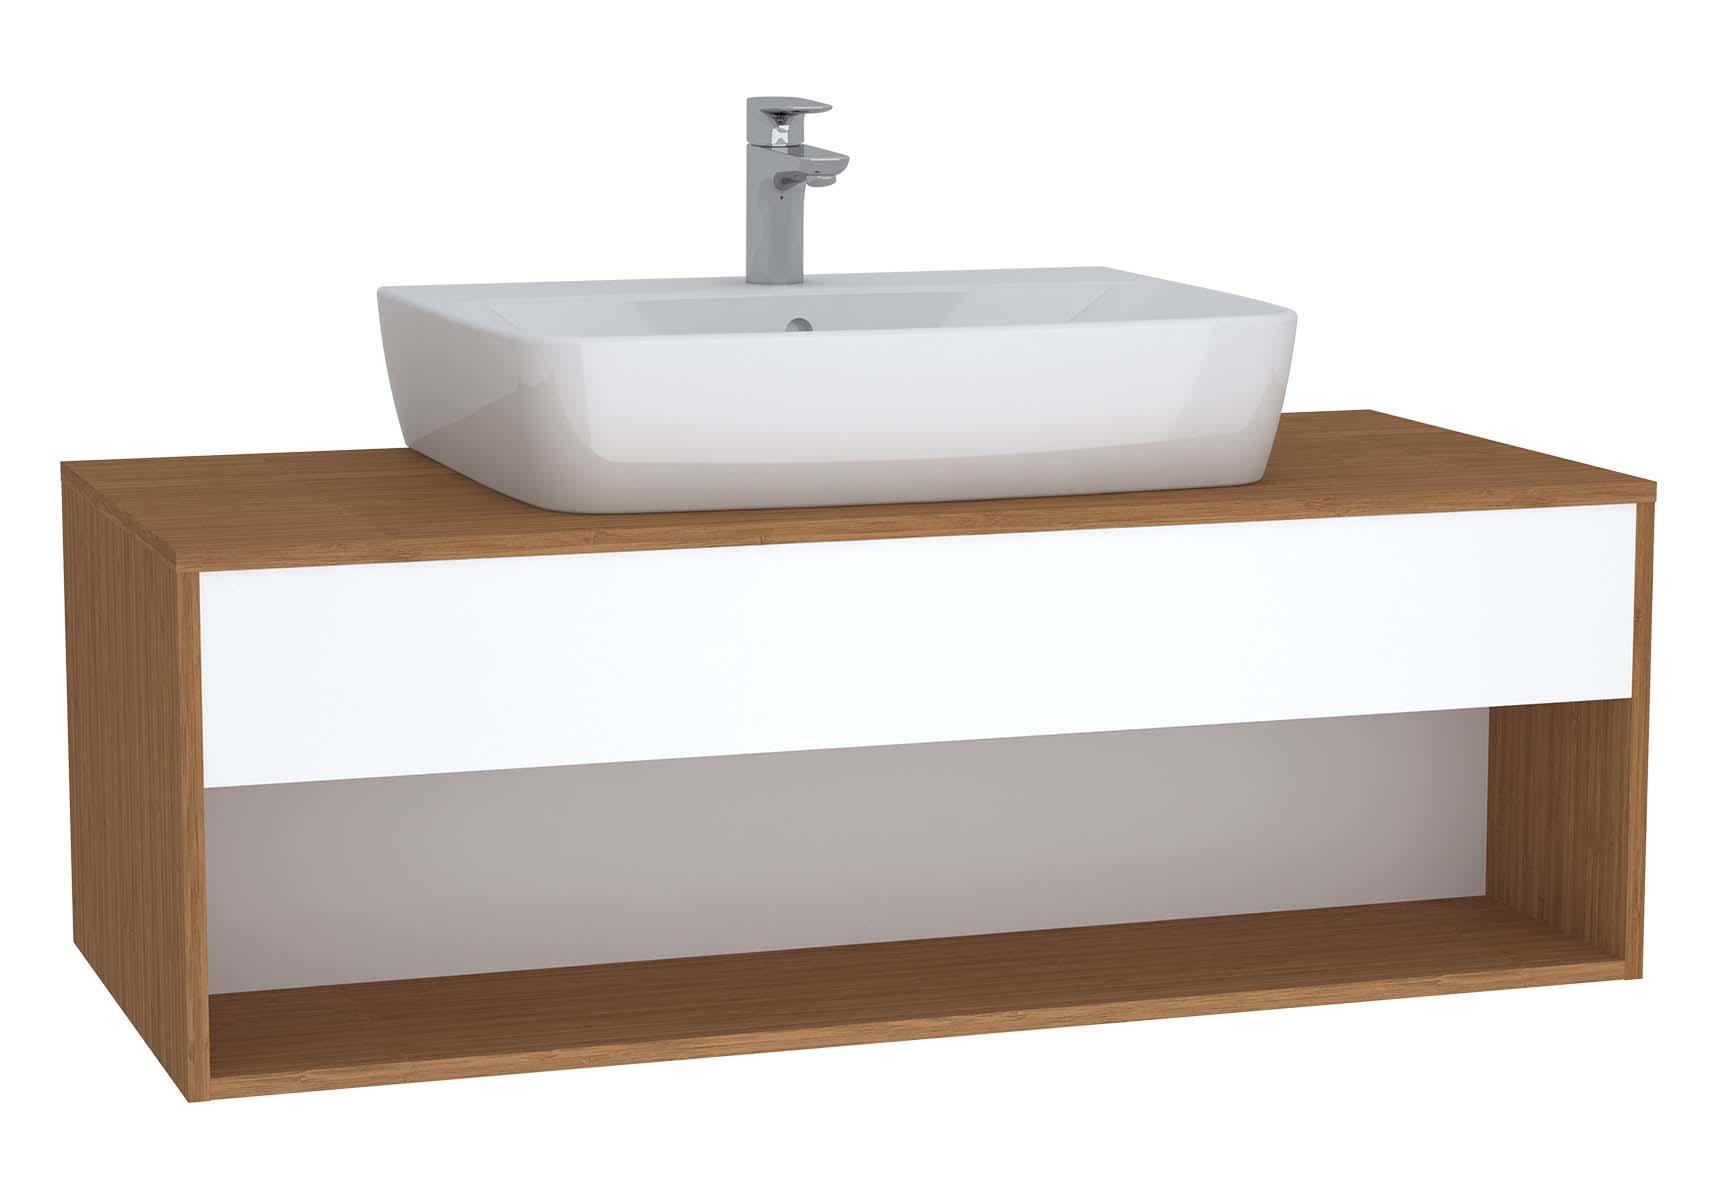 Integra Hotel Unit, 120 cm, for countertop basins, with 53 cm depth, White High Gloss & Bamboo, middle